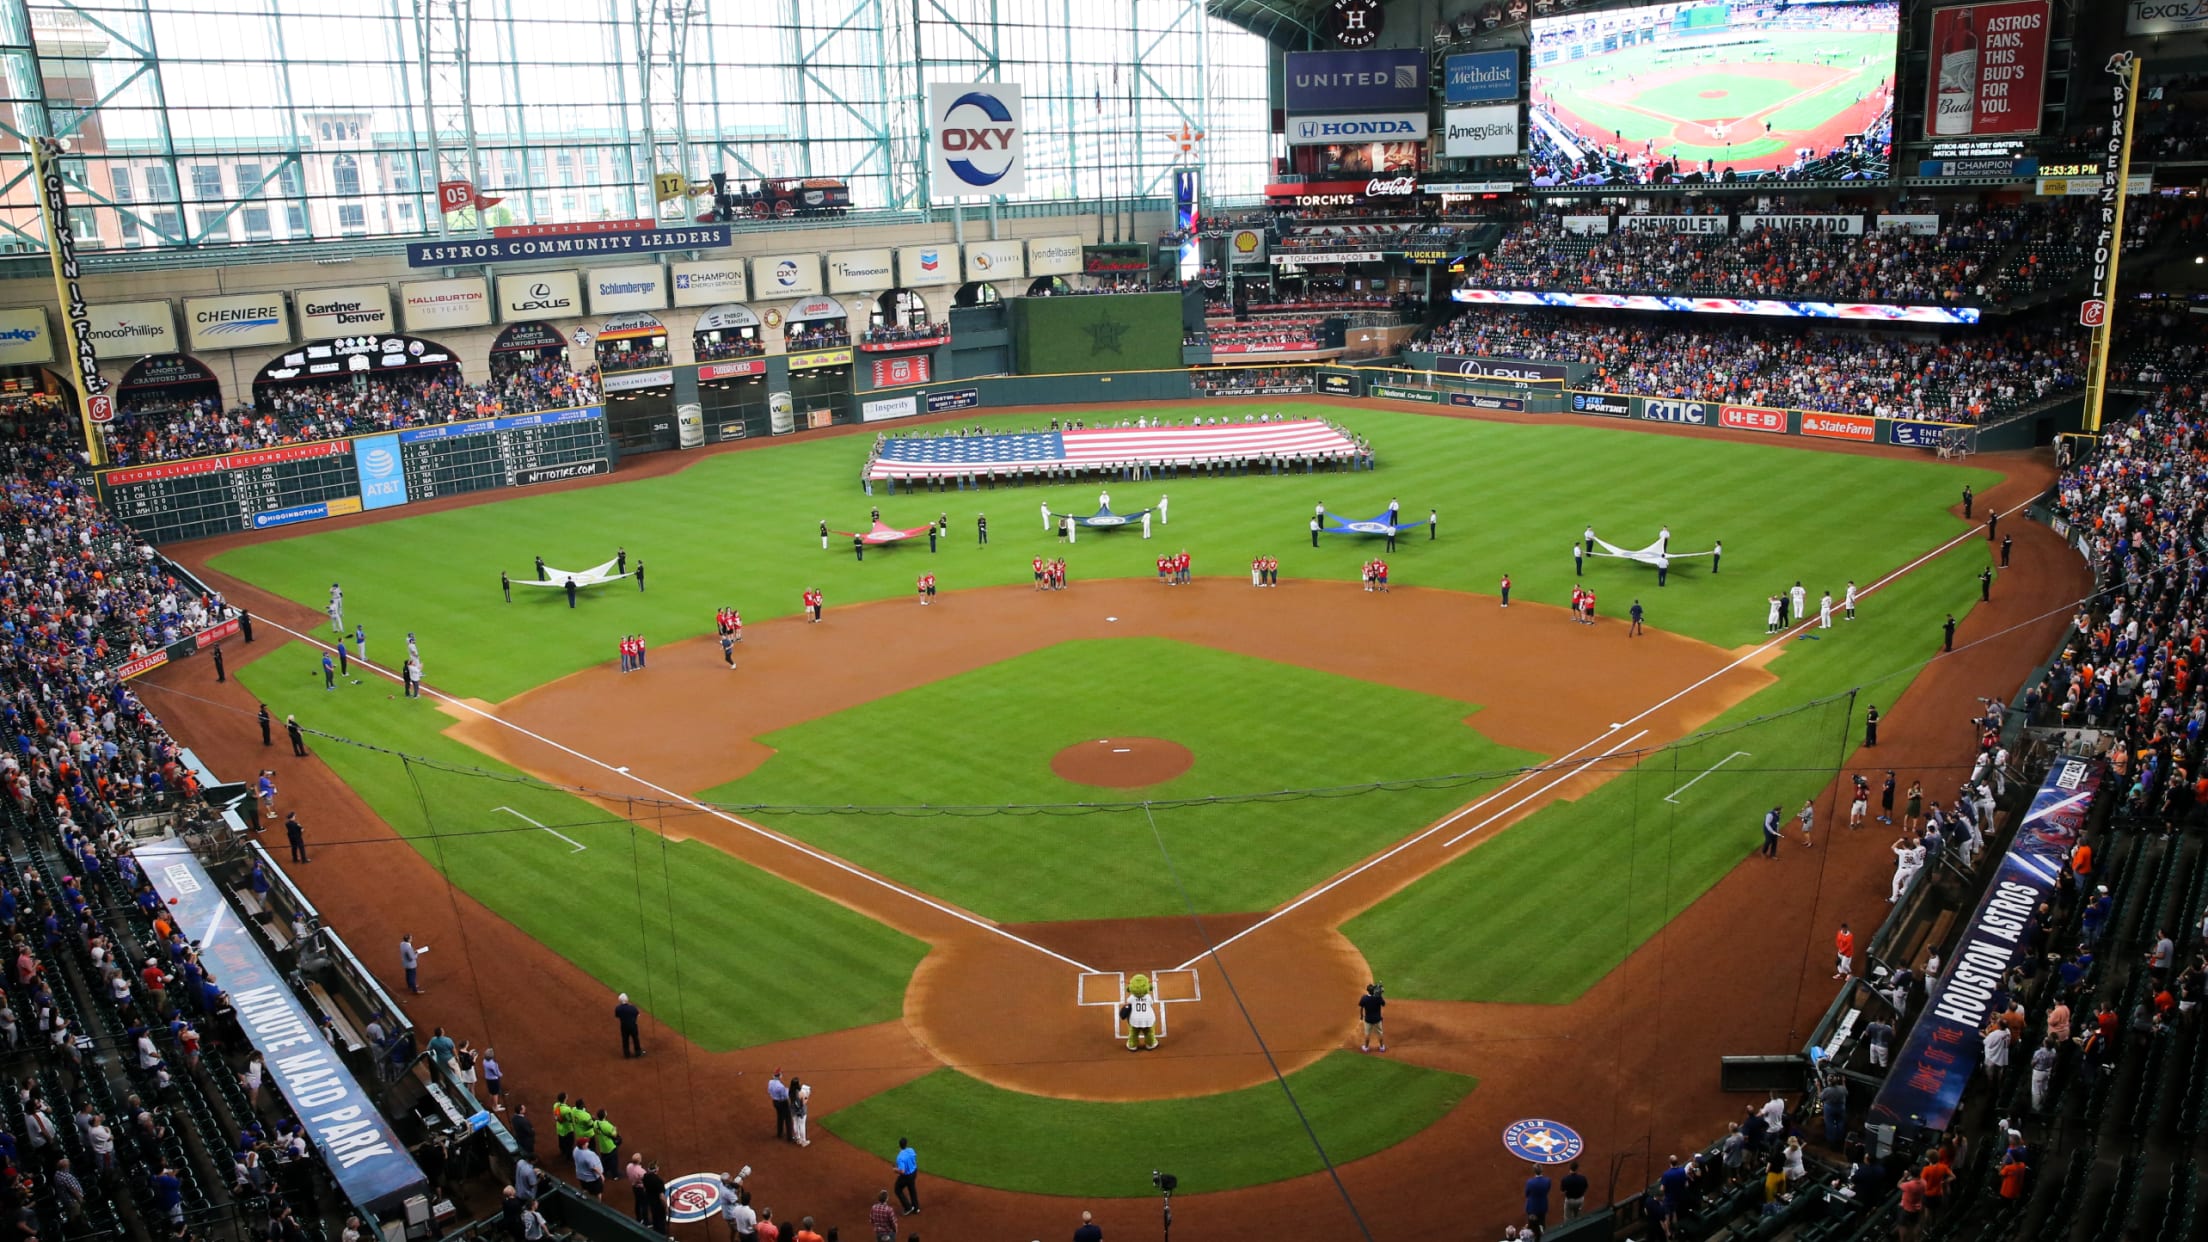 Houston Astros on X: In observance of Memorial Day, the Houston